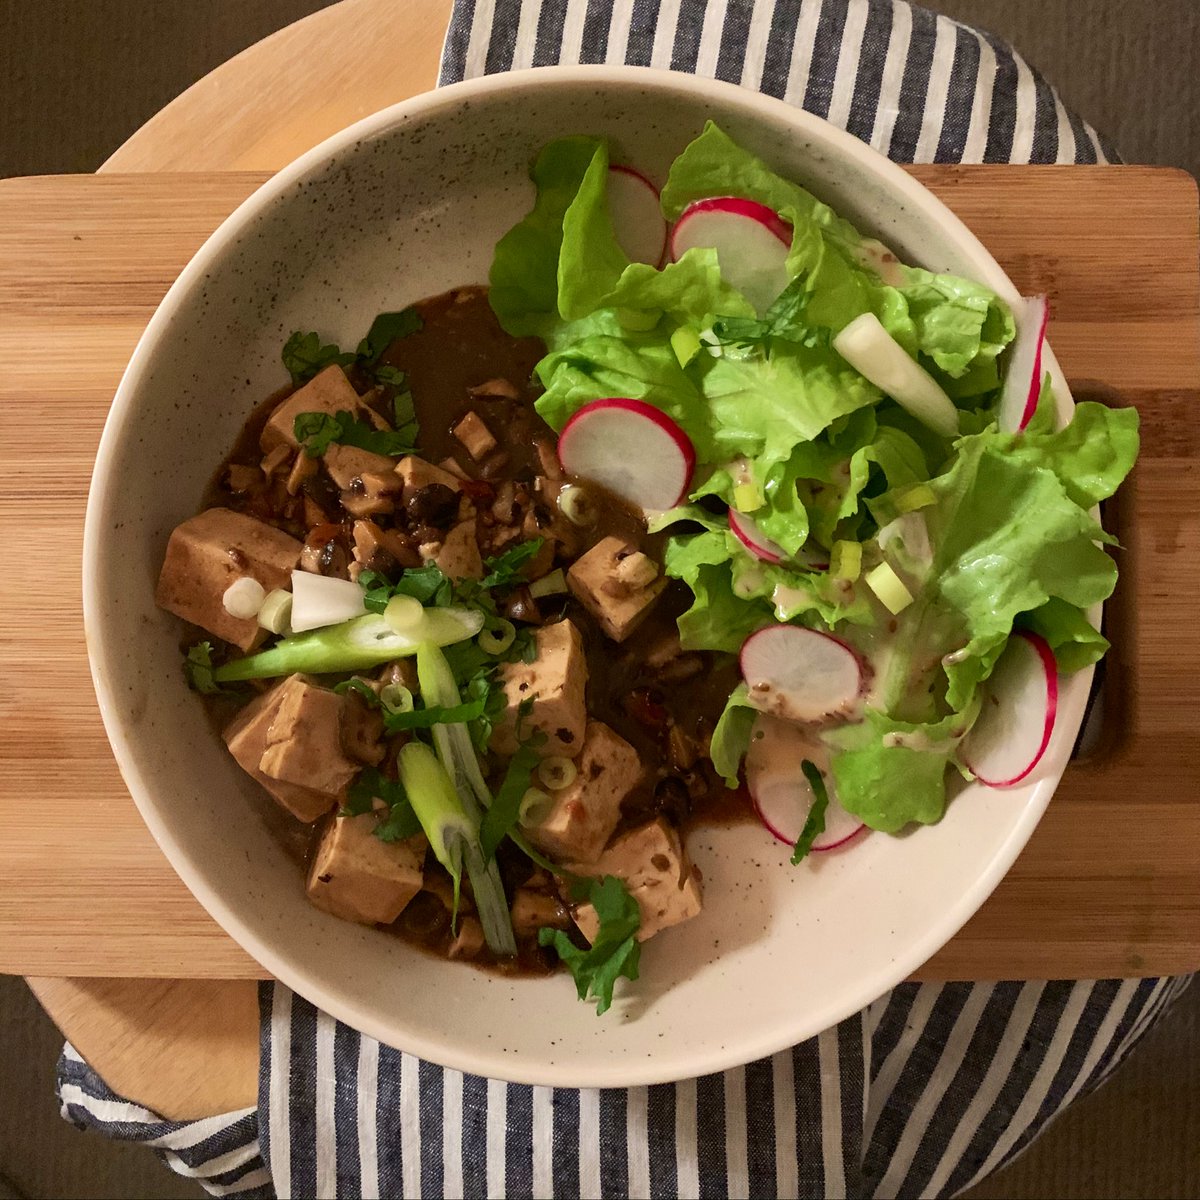 this is an ugly but delicious dinner of mapo tofu (i used mushroom instead of ground meat) and salad. i don’t think butter lettuce and radishes is a traditional sichuan fare but i was craving some crunchy veg